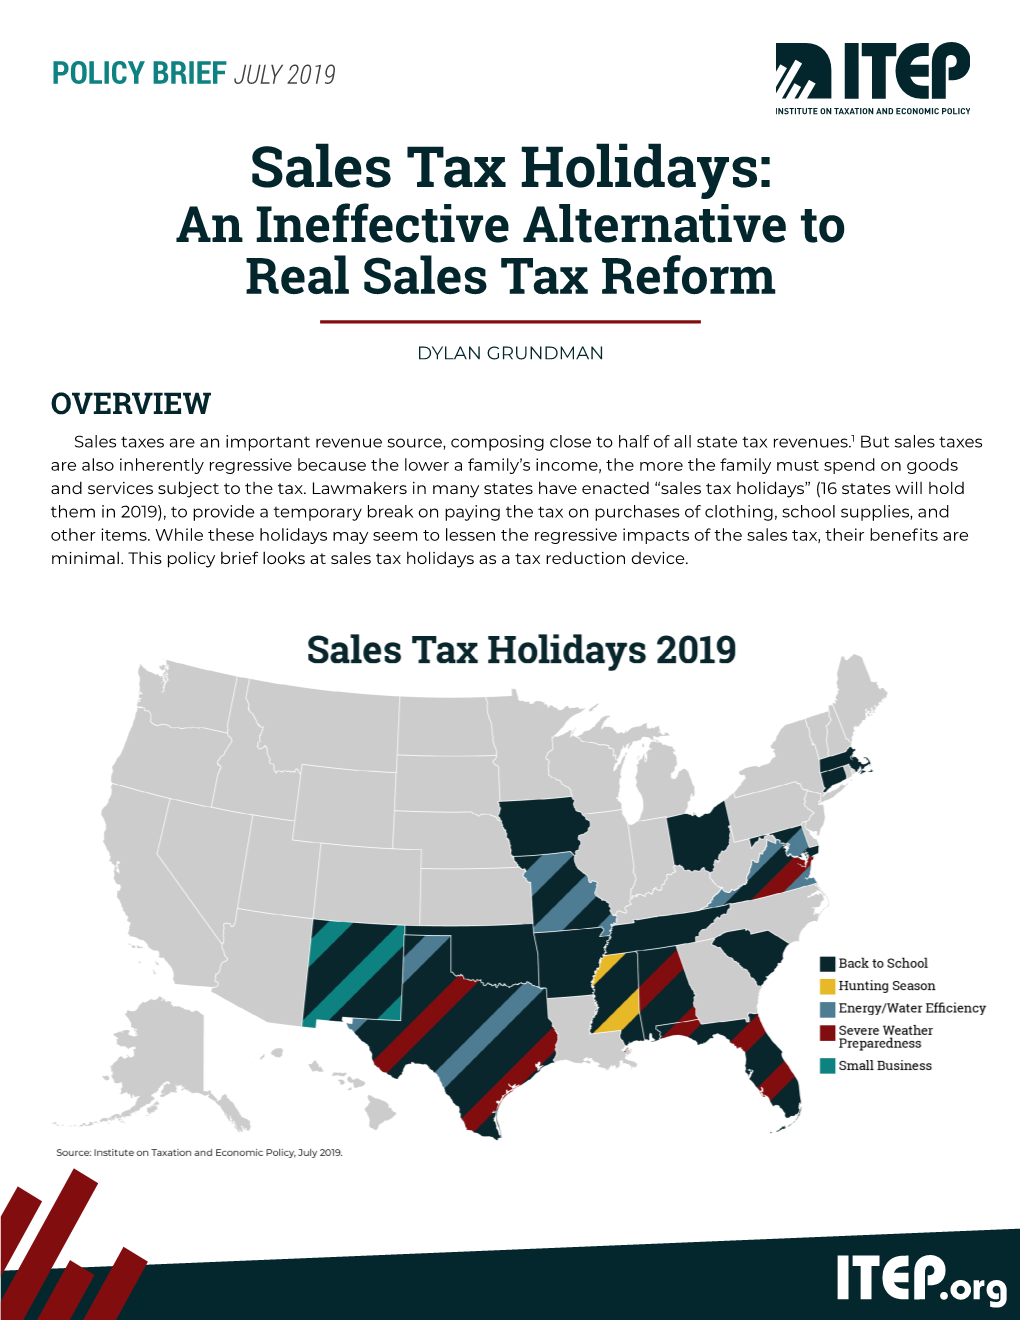 Sales Tax Holidays: an Ineffective Alternative to Real Sales Tax Reform